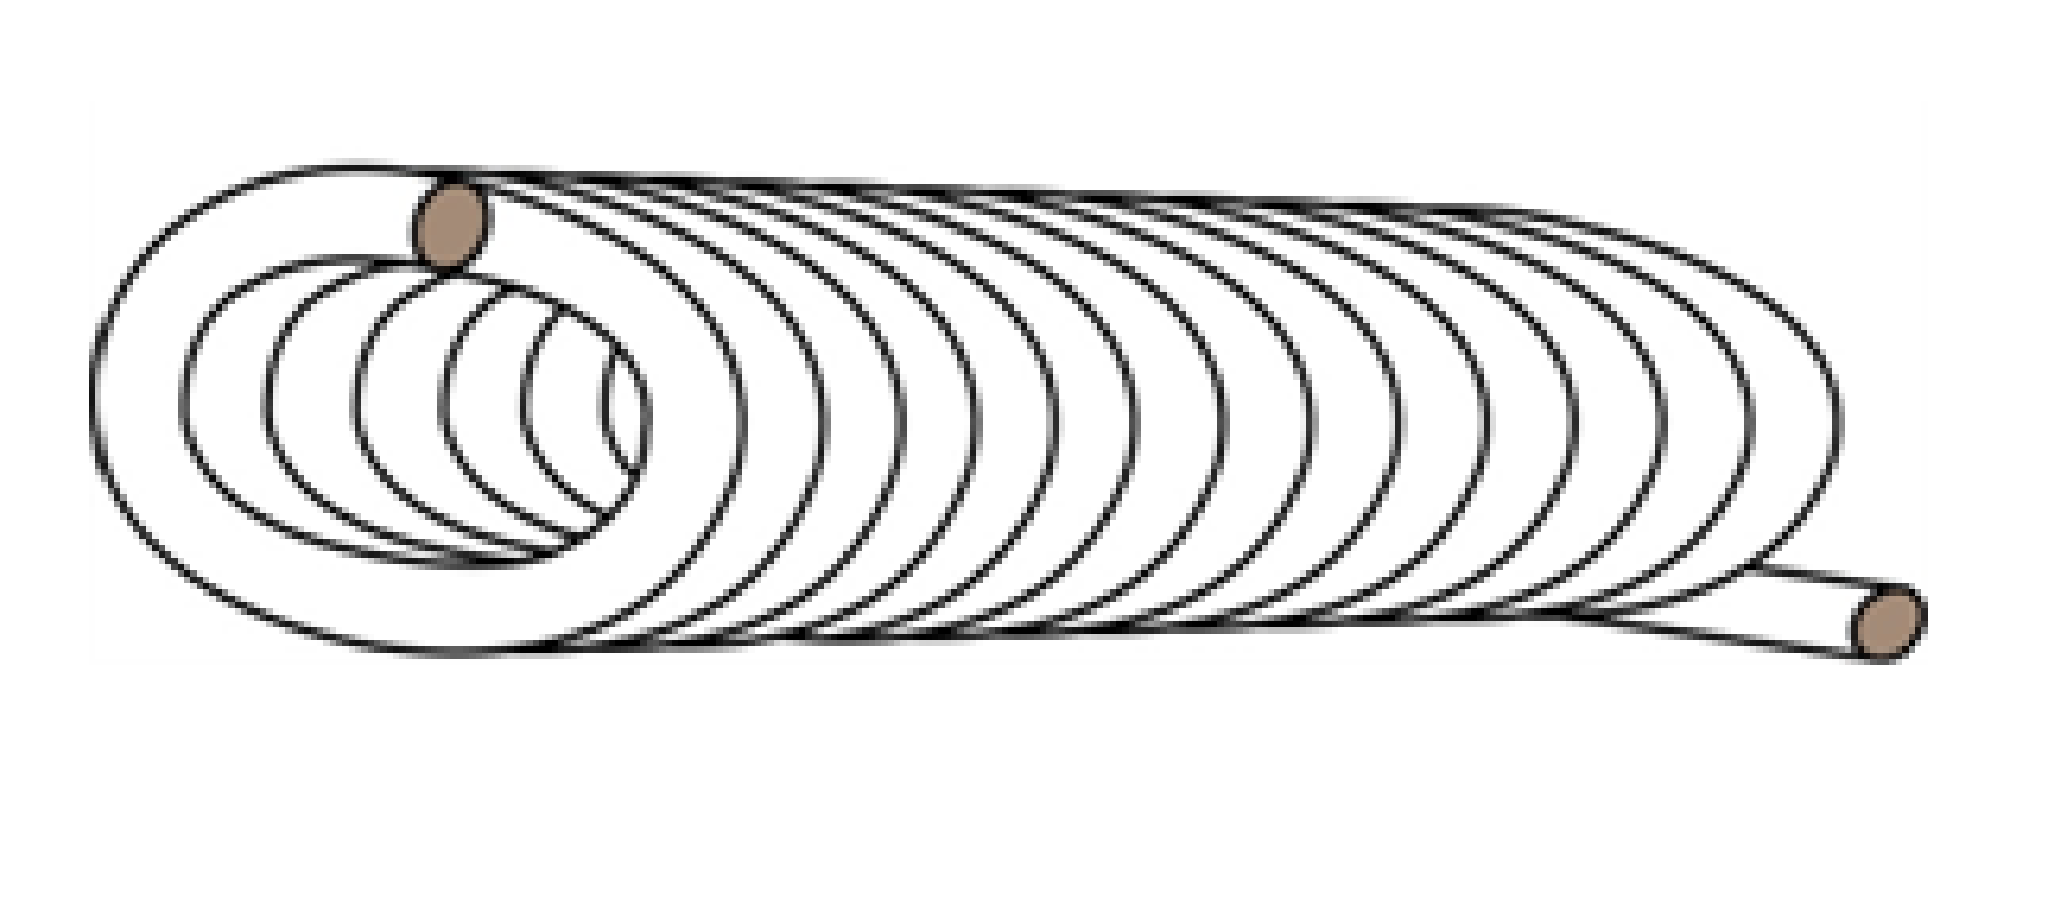 Fig 03: Coiled Type